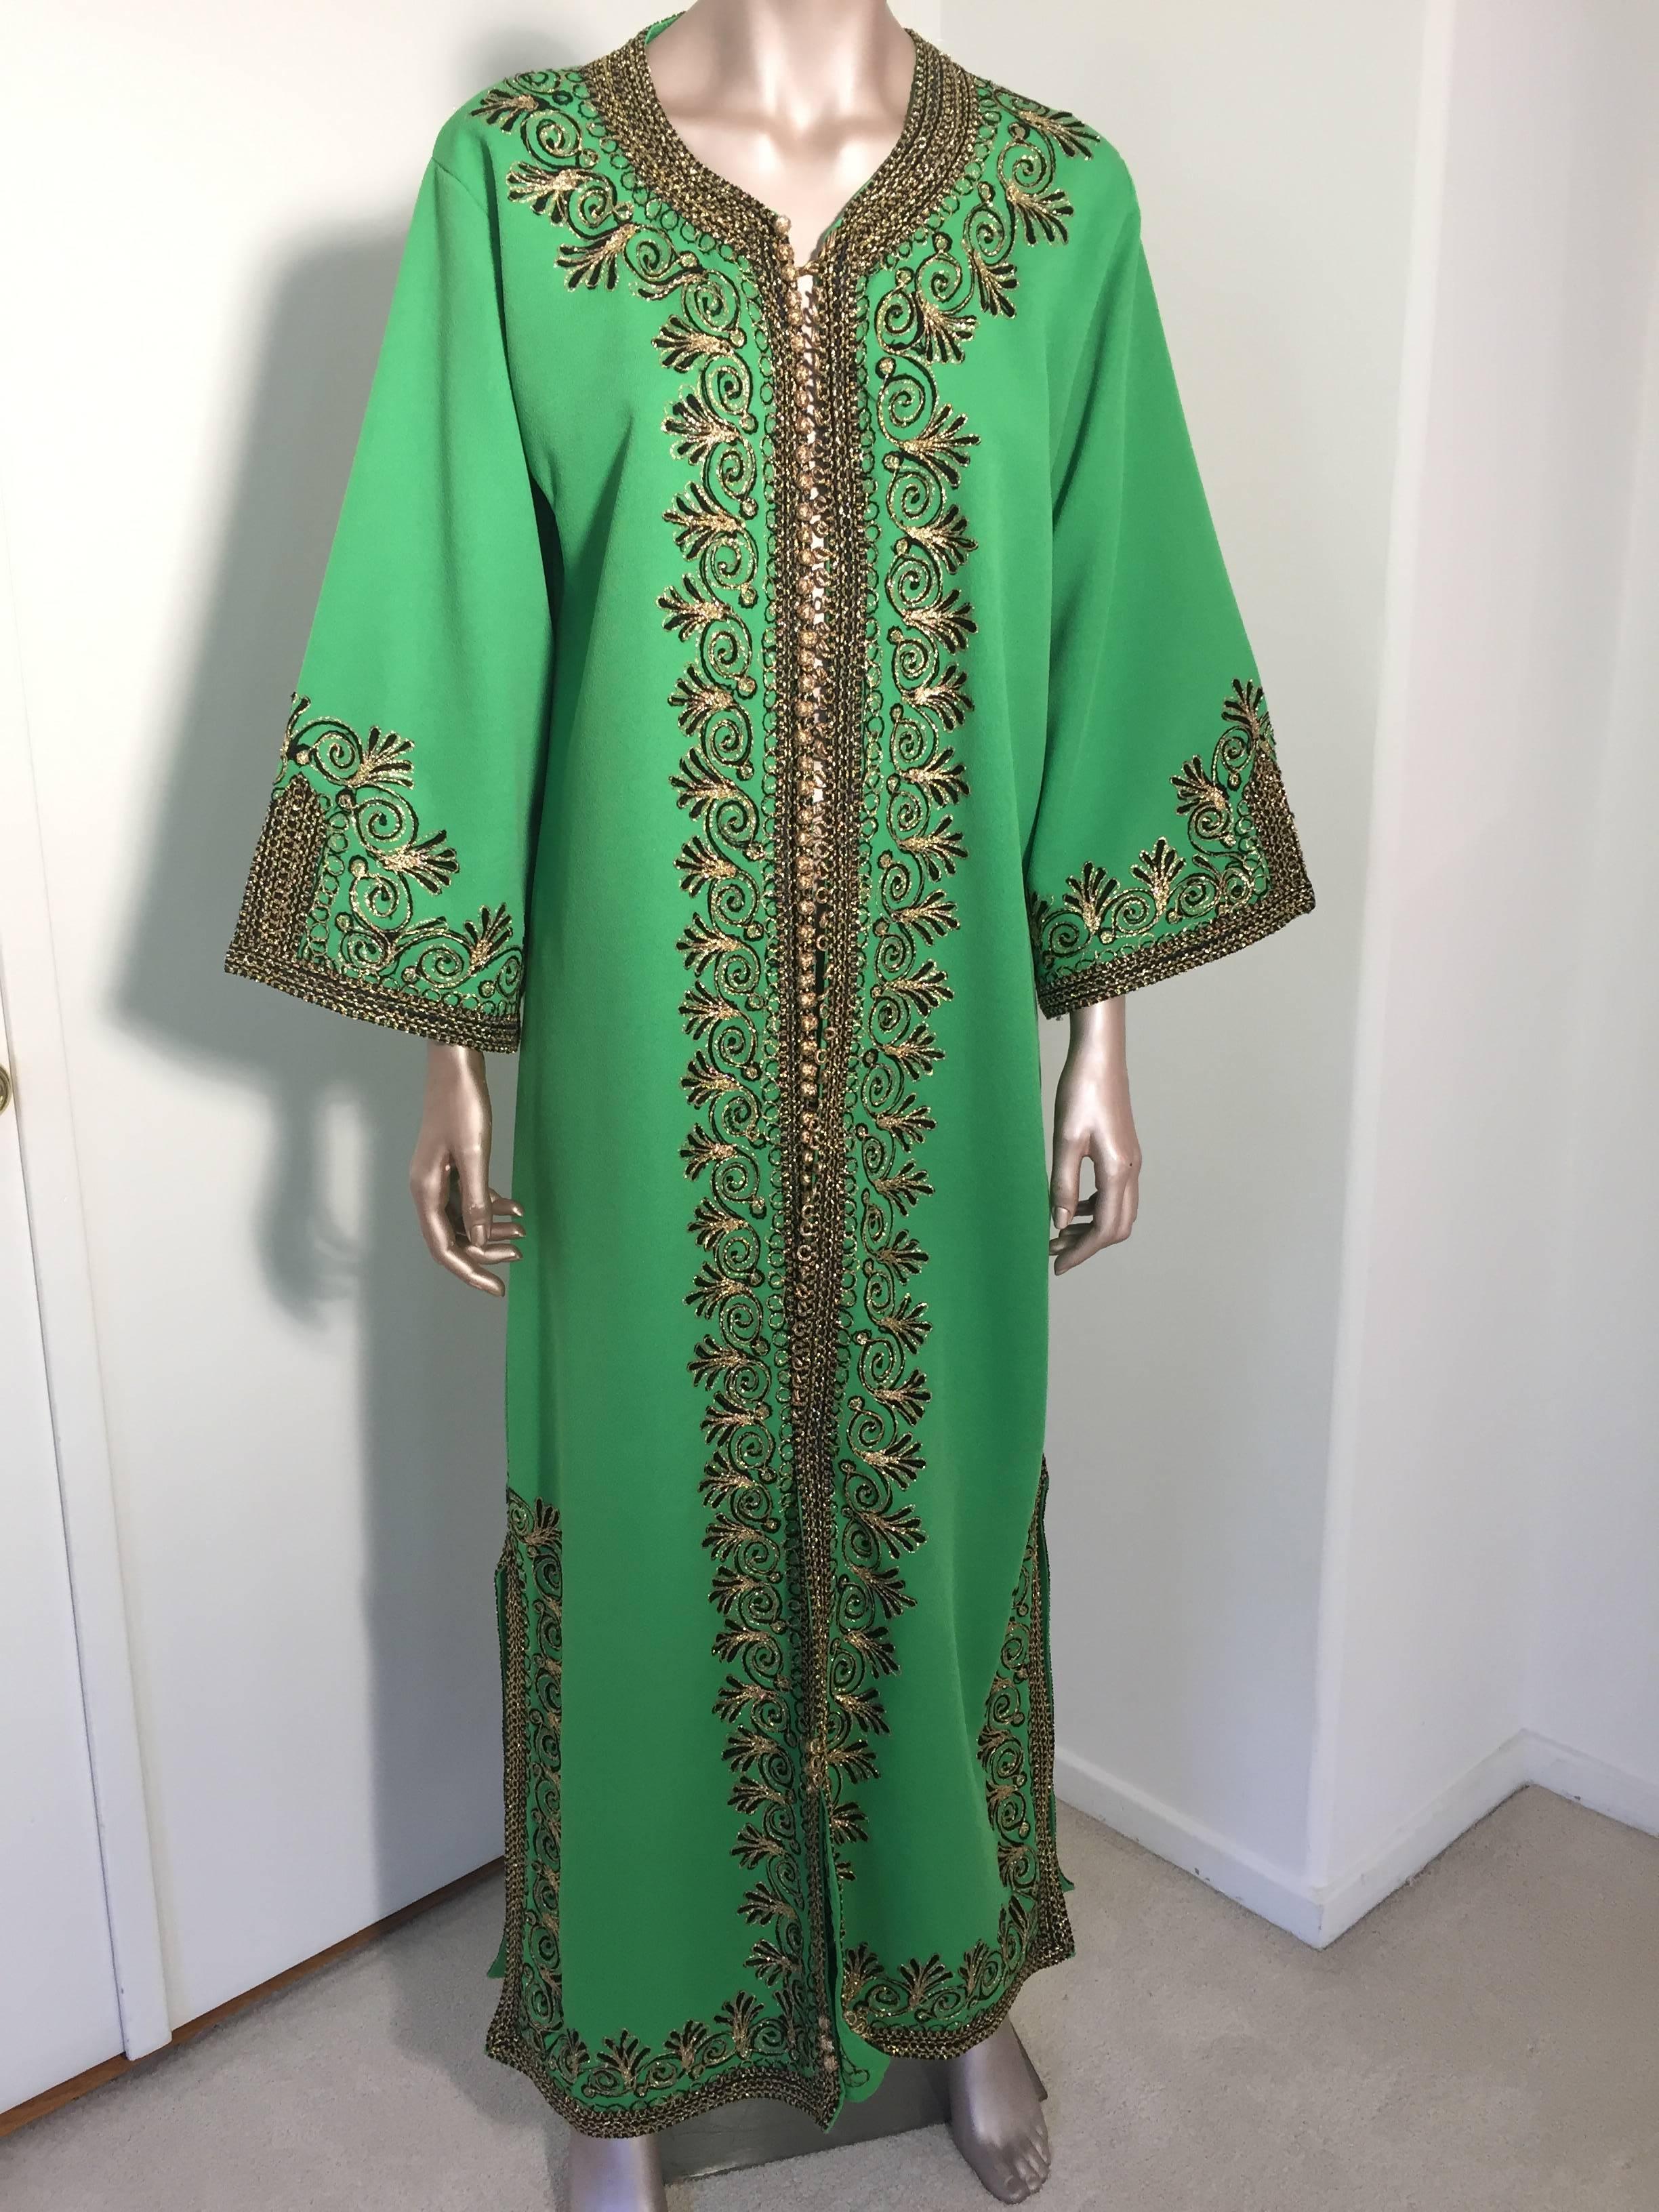 Elegant vintage Moroccan green caftan, poly jersey embroidered with black and gold threads design all-over. 
You could wear this maxi dress kaftan closed or open like a coat. 
The kaftan features a traditional neckline, with side slits and gently